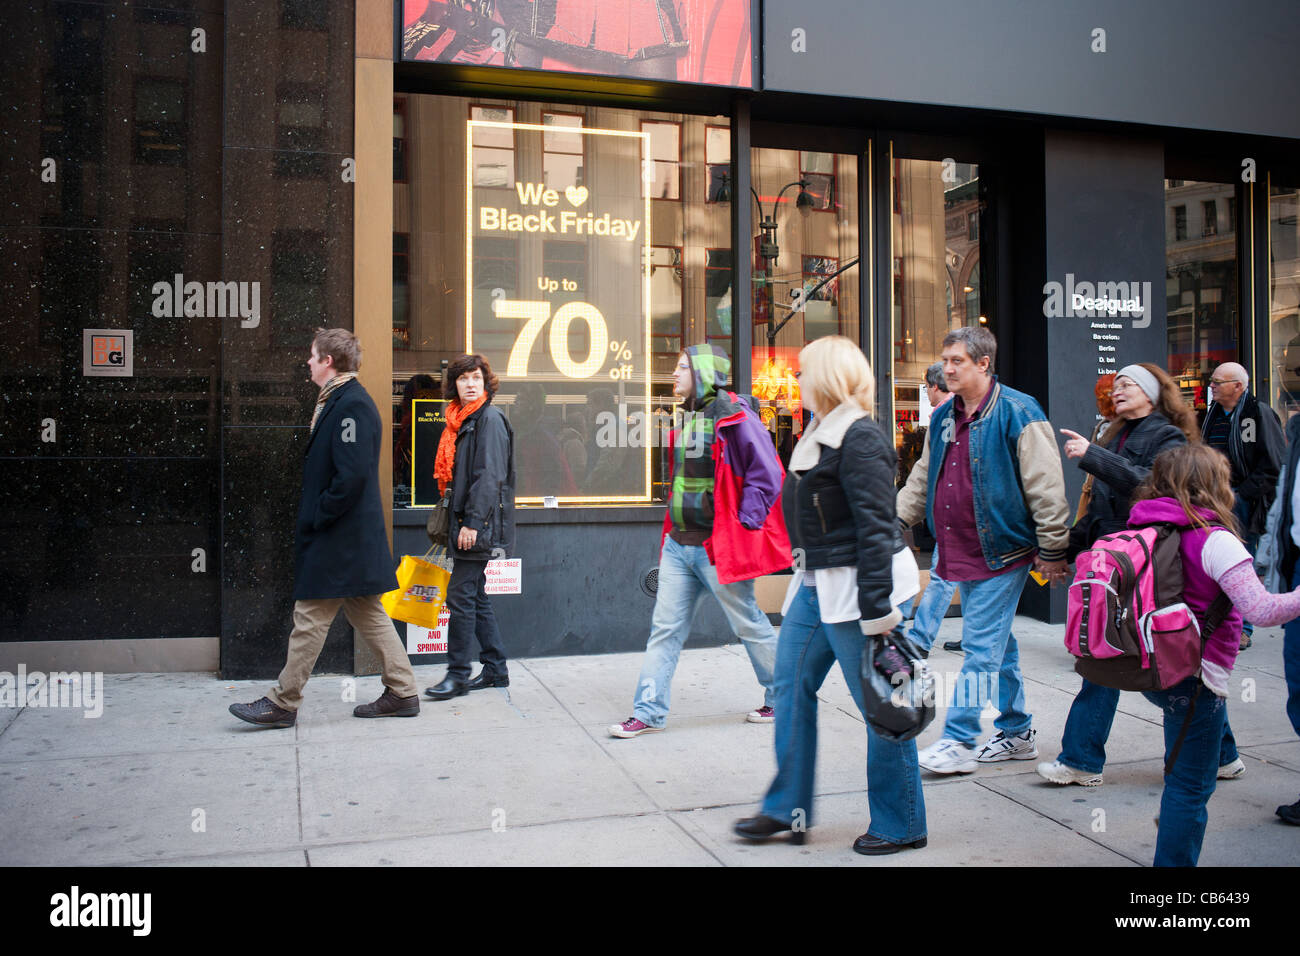 Shoppers outside the Desigual store advertising their Black Friday sales  Stock Photo - Alamy